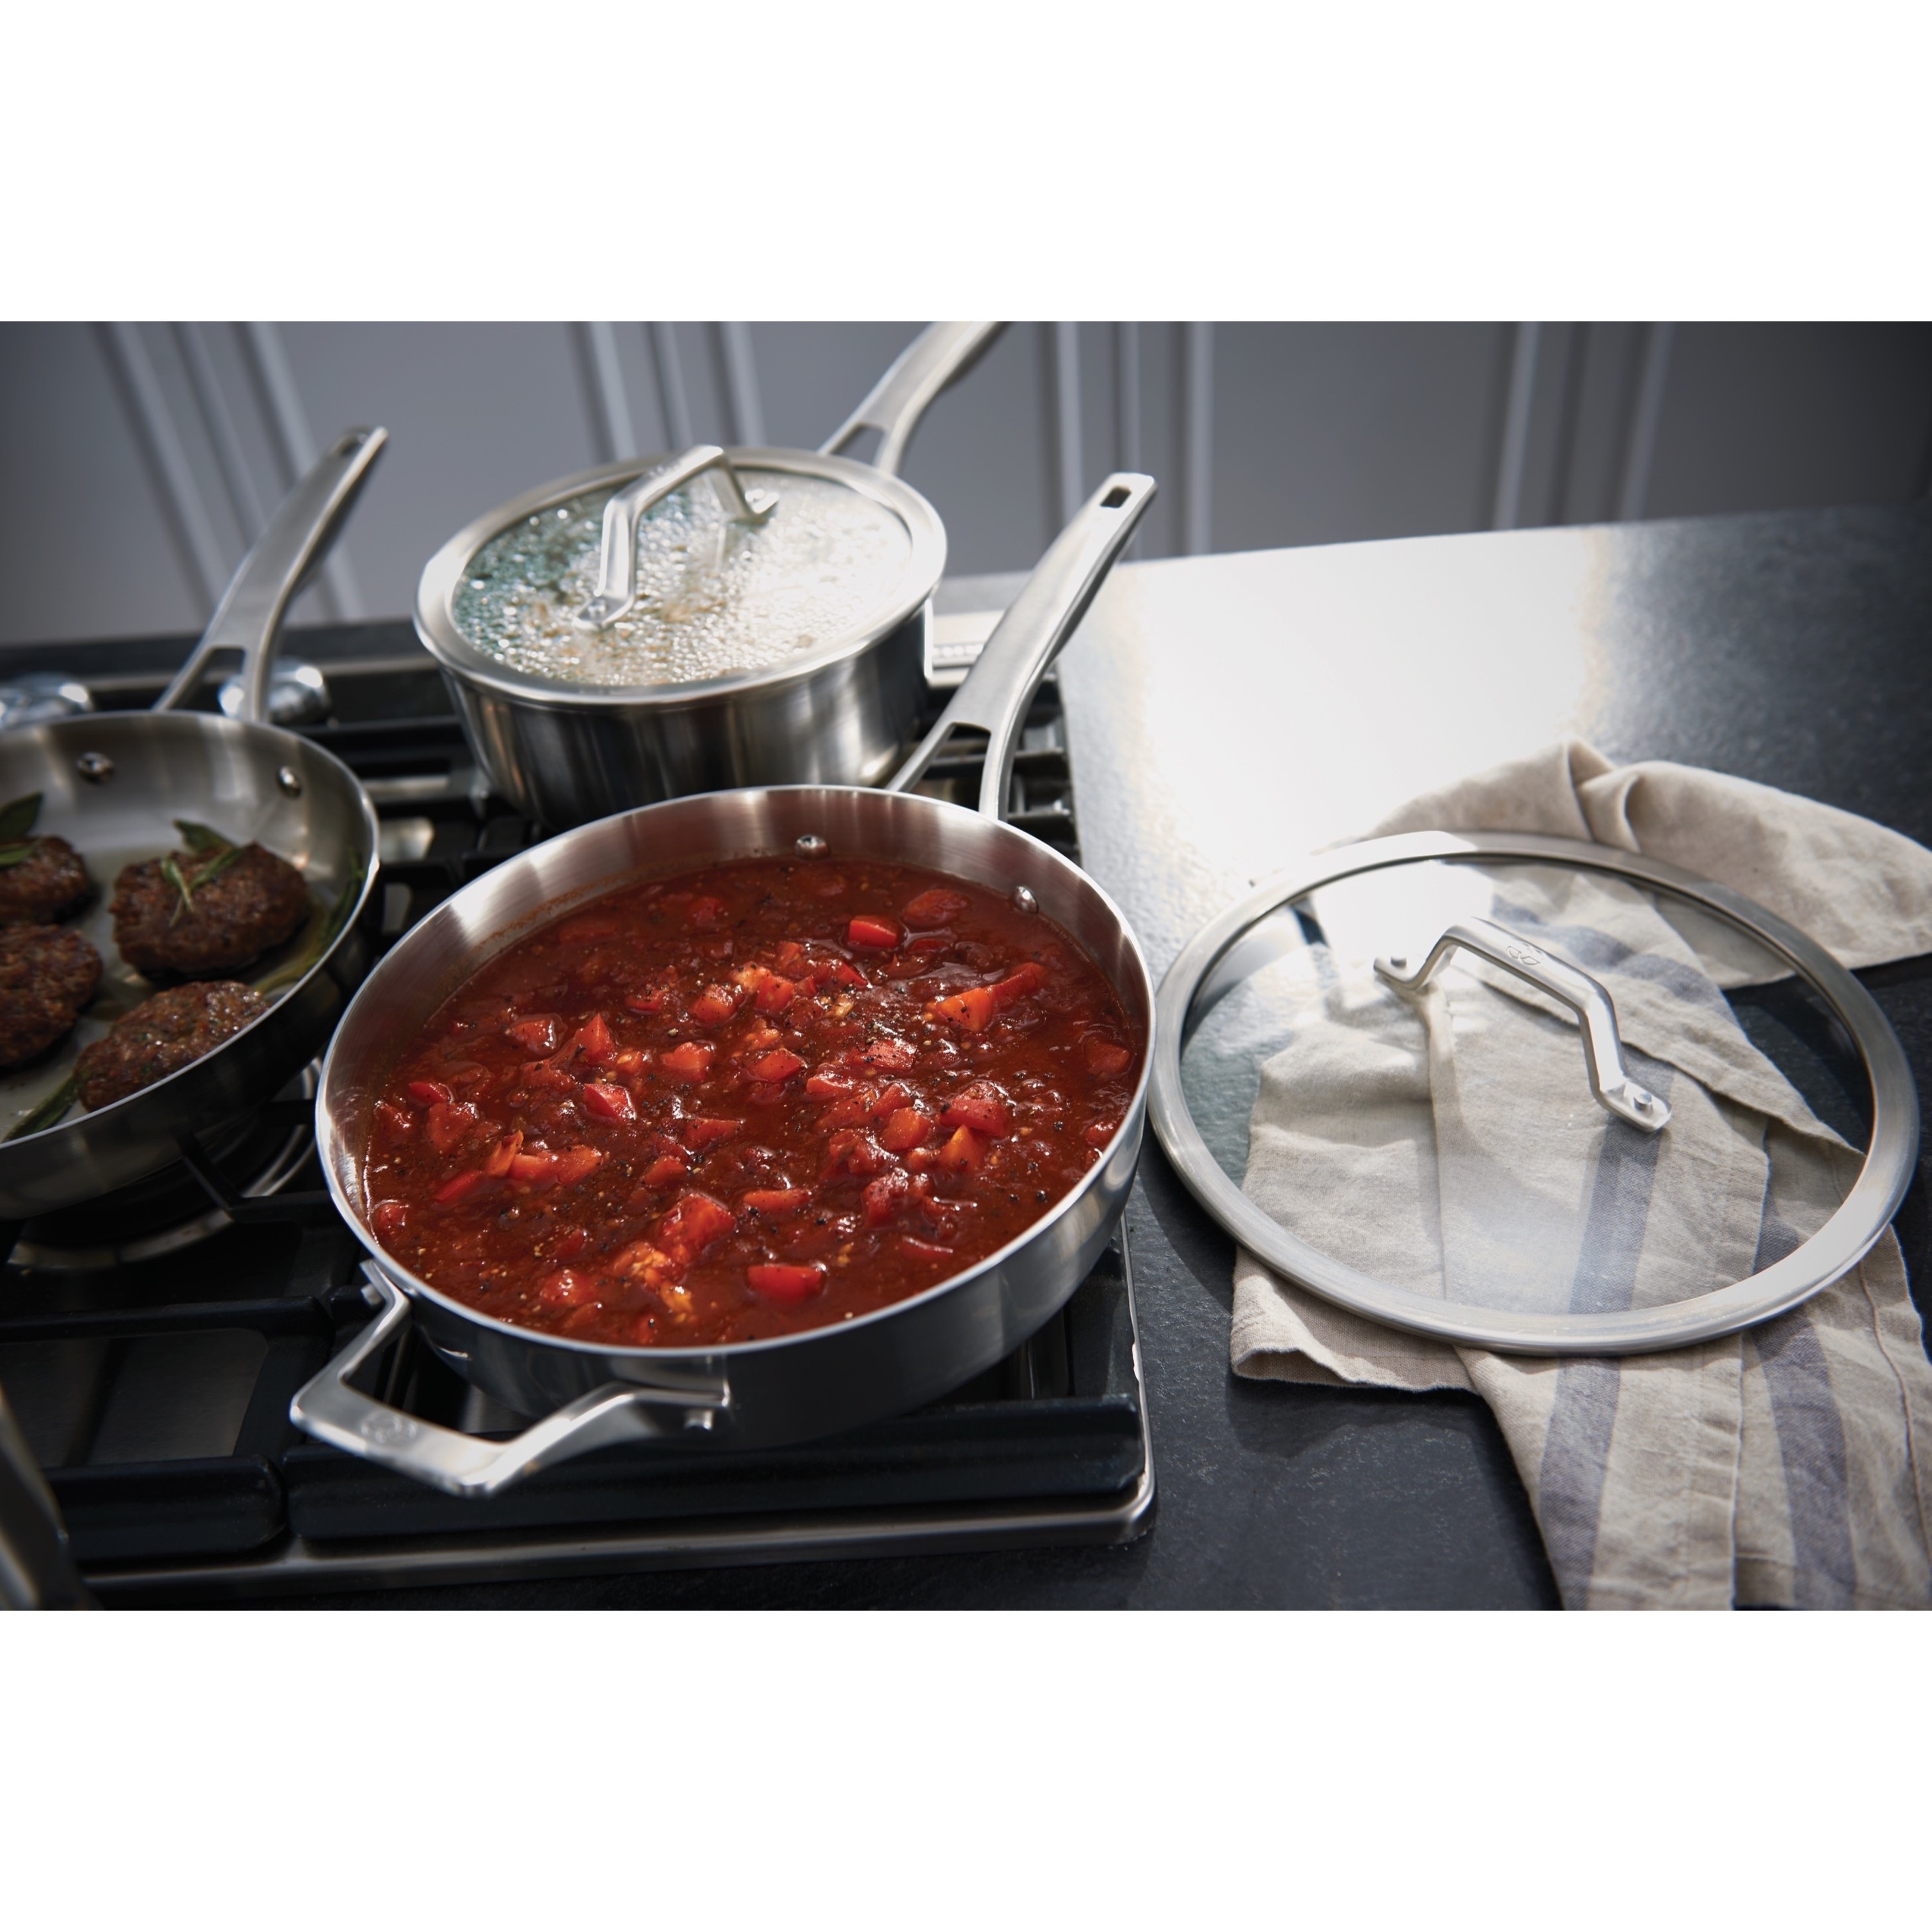 Circulon Stainless Steel Induction Stockpot with Lid and SteelShield Hybrid  Stainless and Nonstick Technology, 7.5-Quart, Silver - Bed Bath & Beyond -  33934226